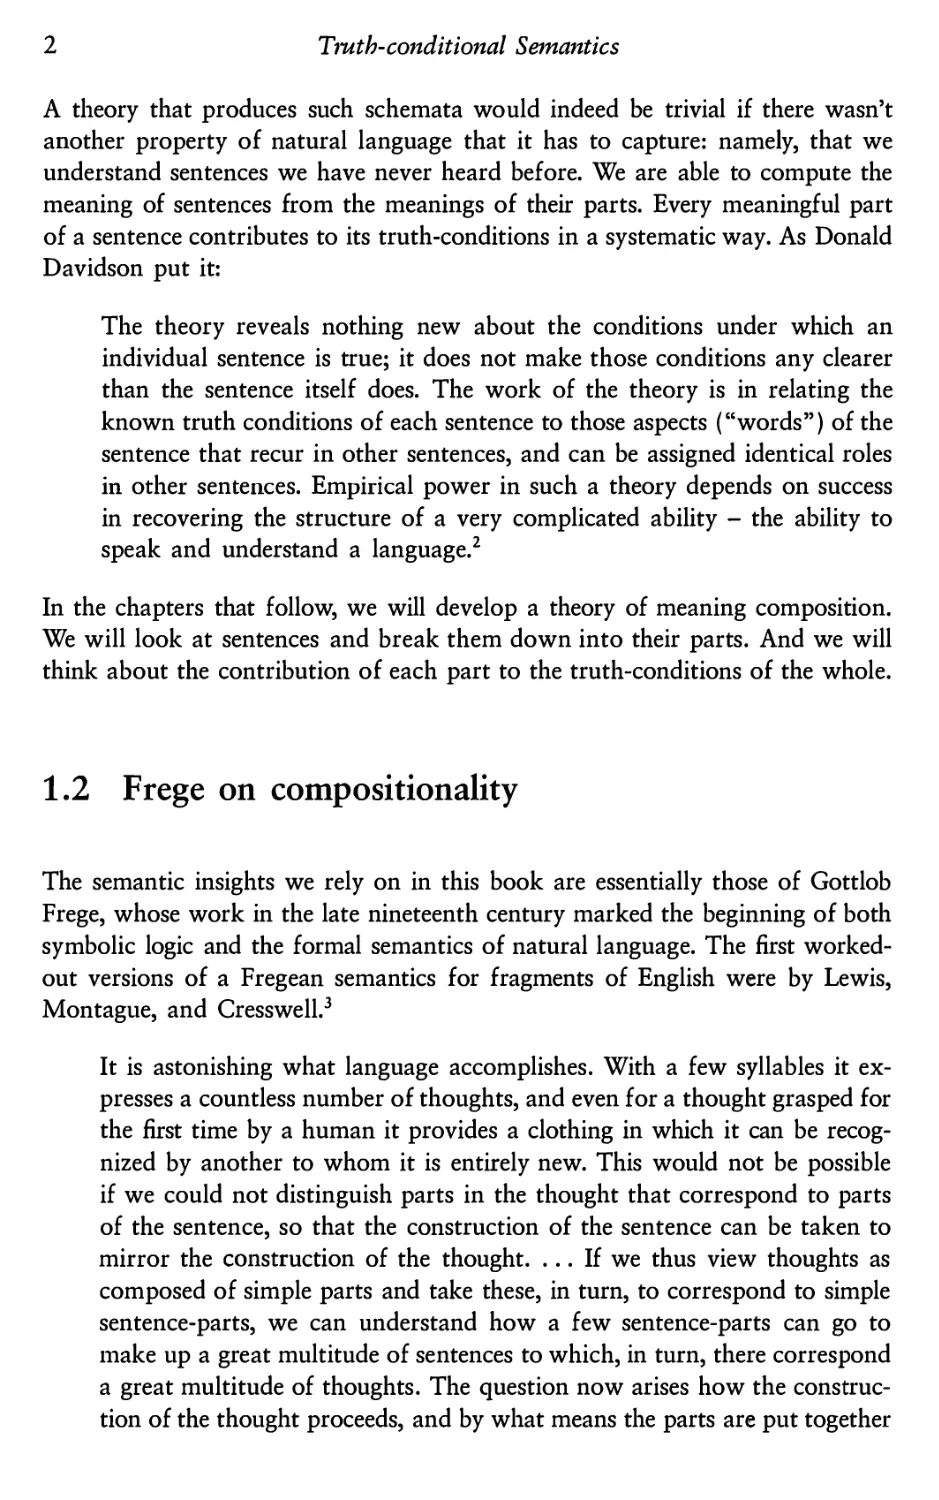 1.2 Frege on compositionality